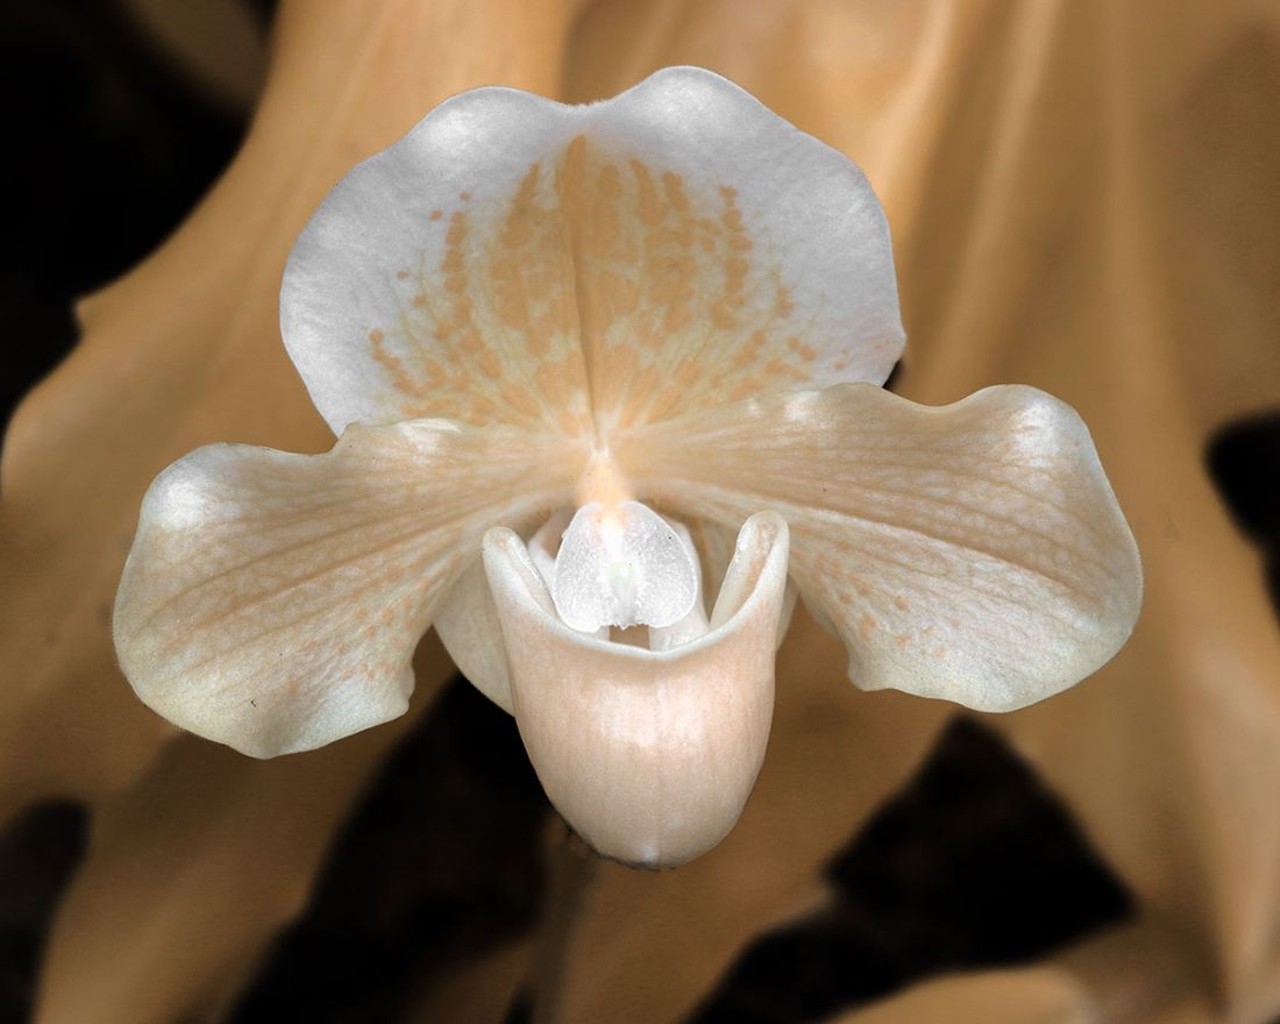 MoBOT's Orchids Look Gorgeous in New Photos